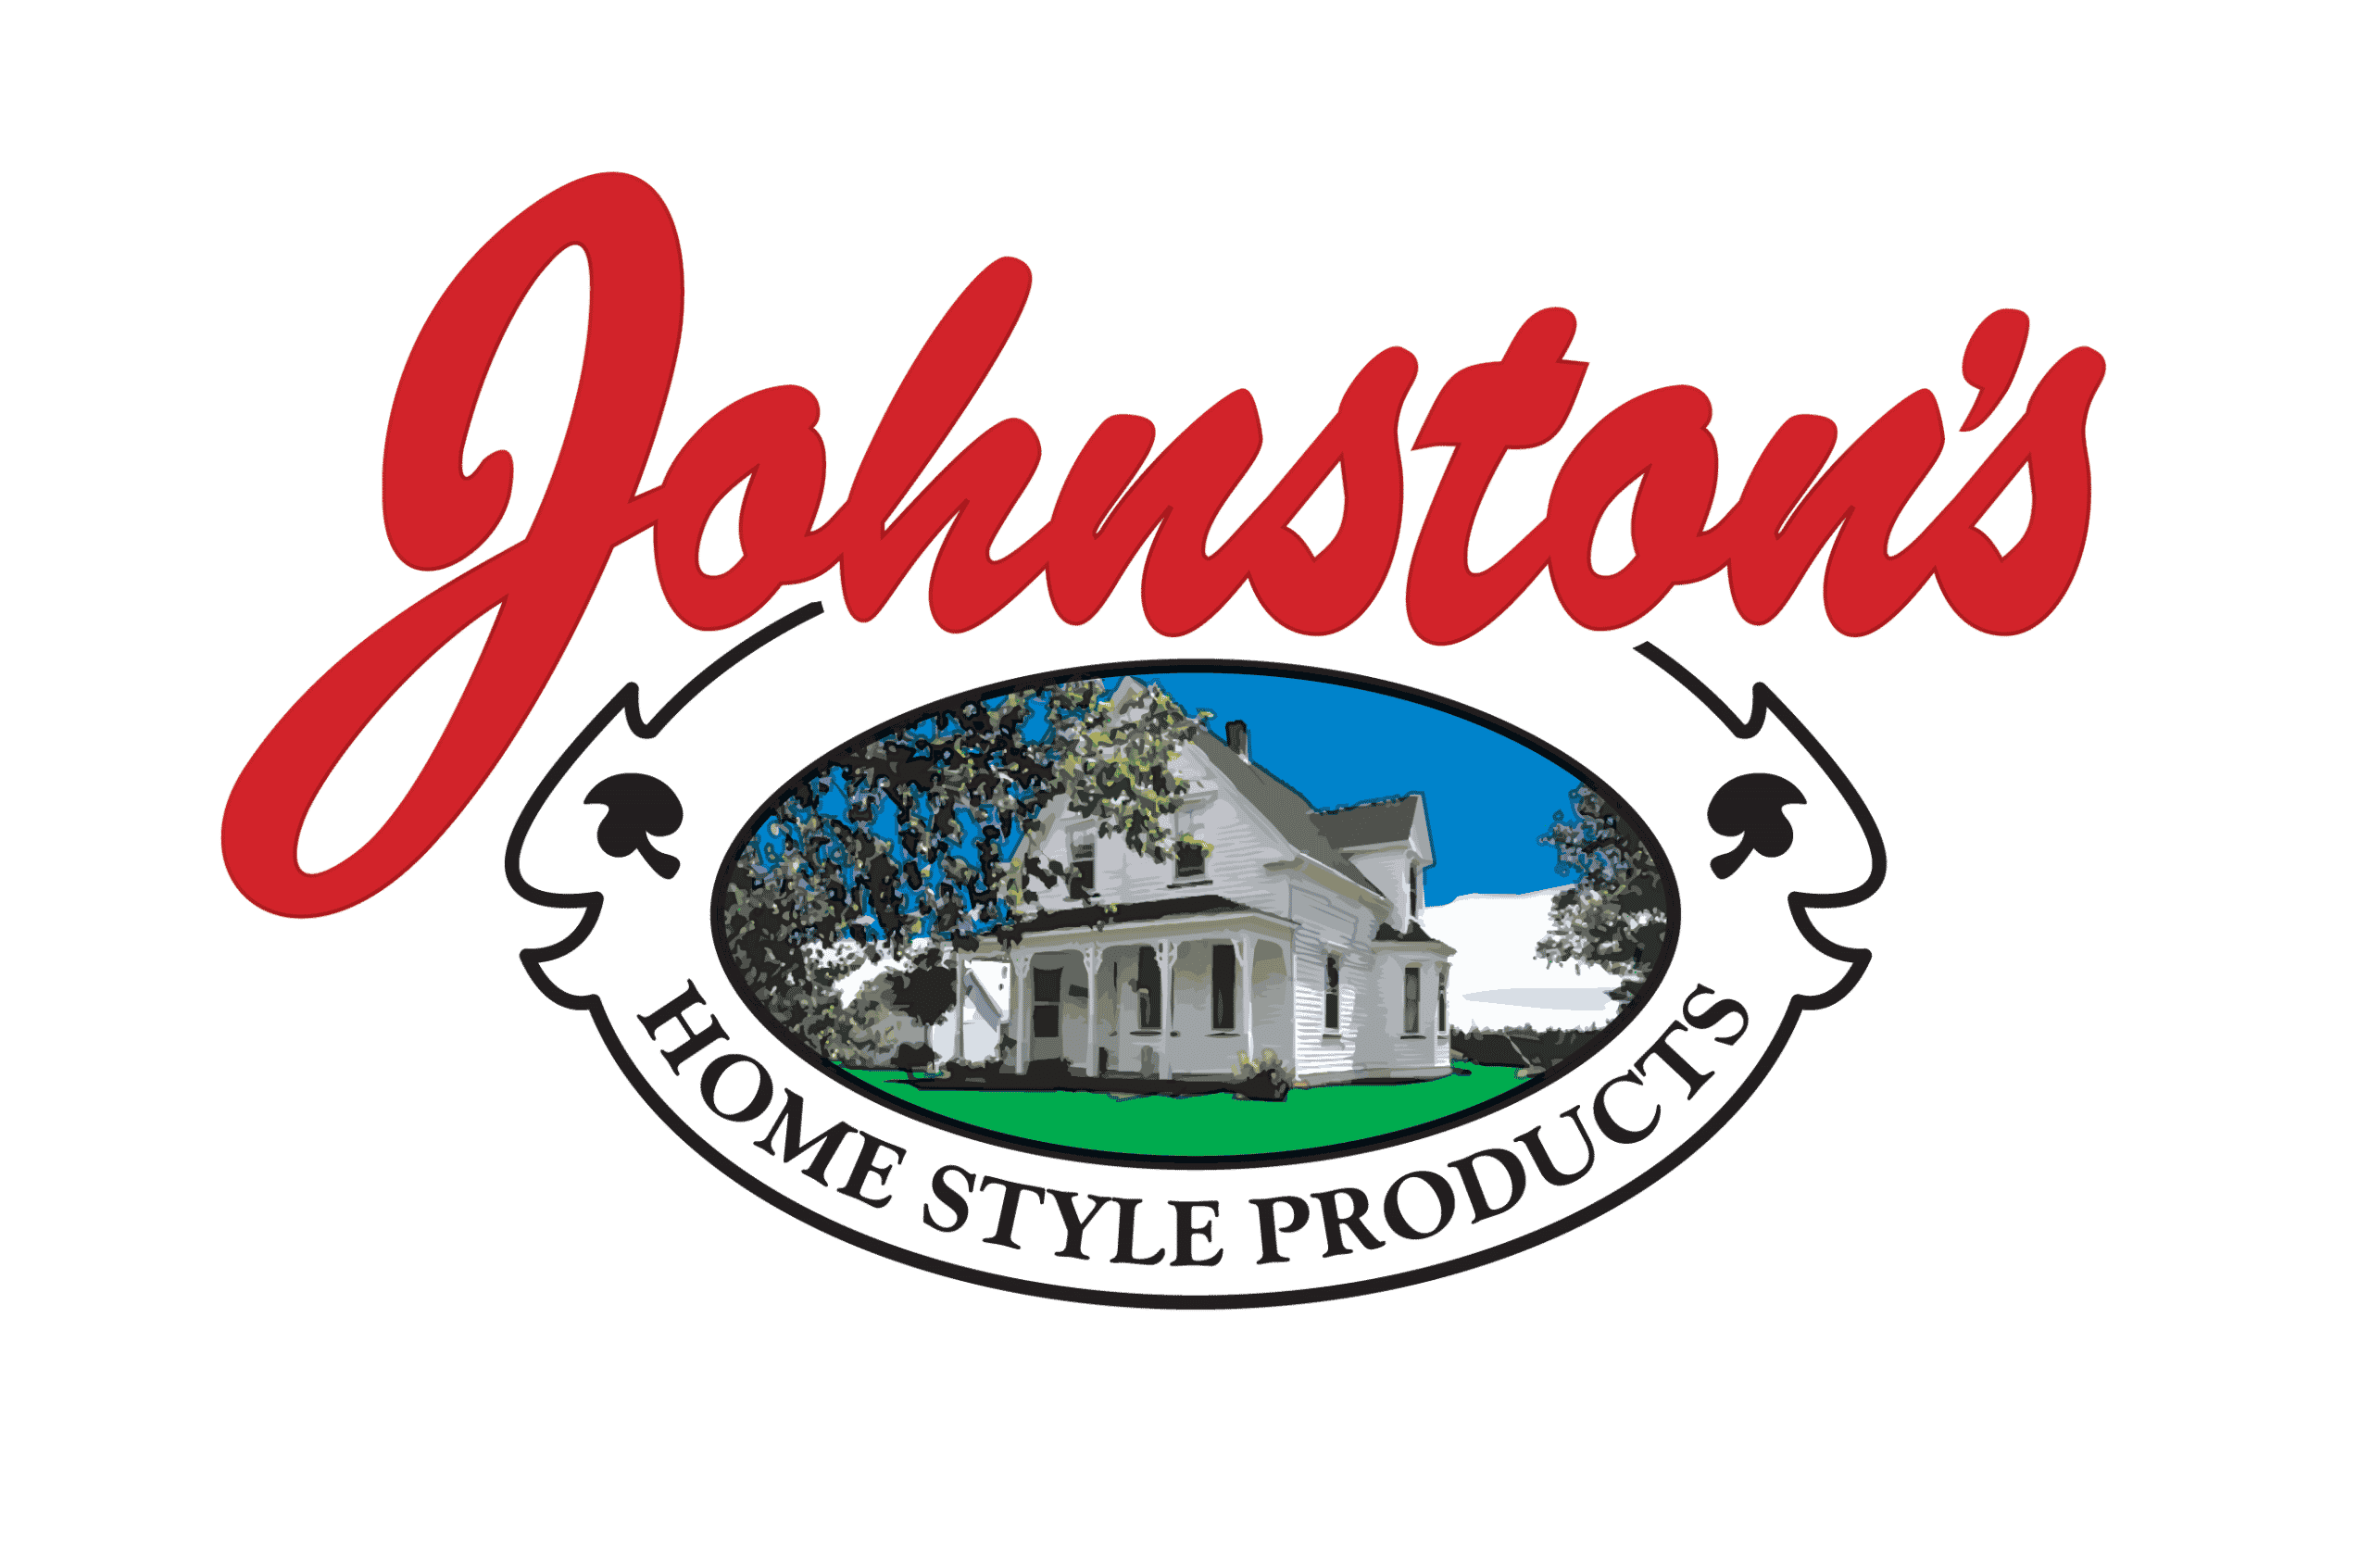 Johnston's Home Style Products Logo. Red Johnstons font, Johnston's home, black homestyle products text.